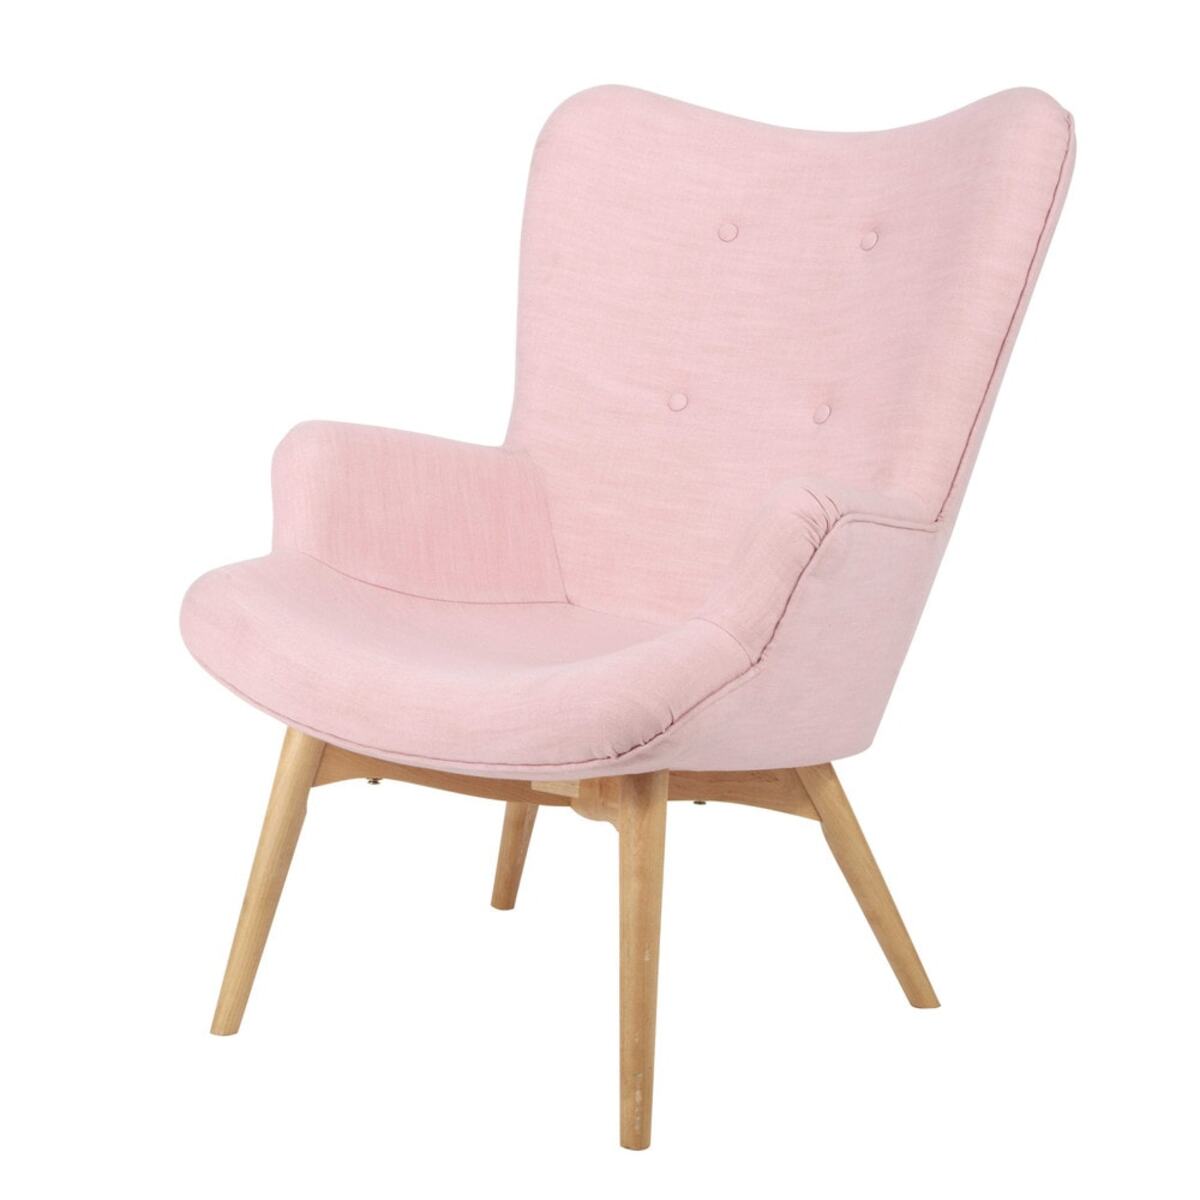 Fauteuil style scandinave rose Iceberg